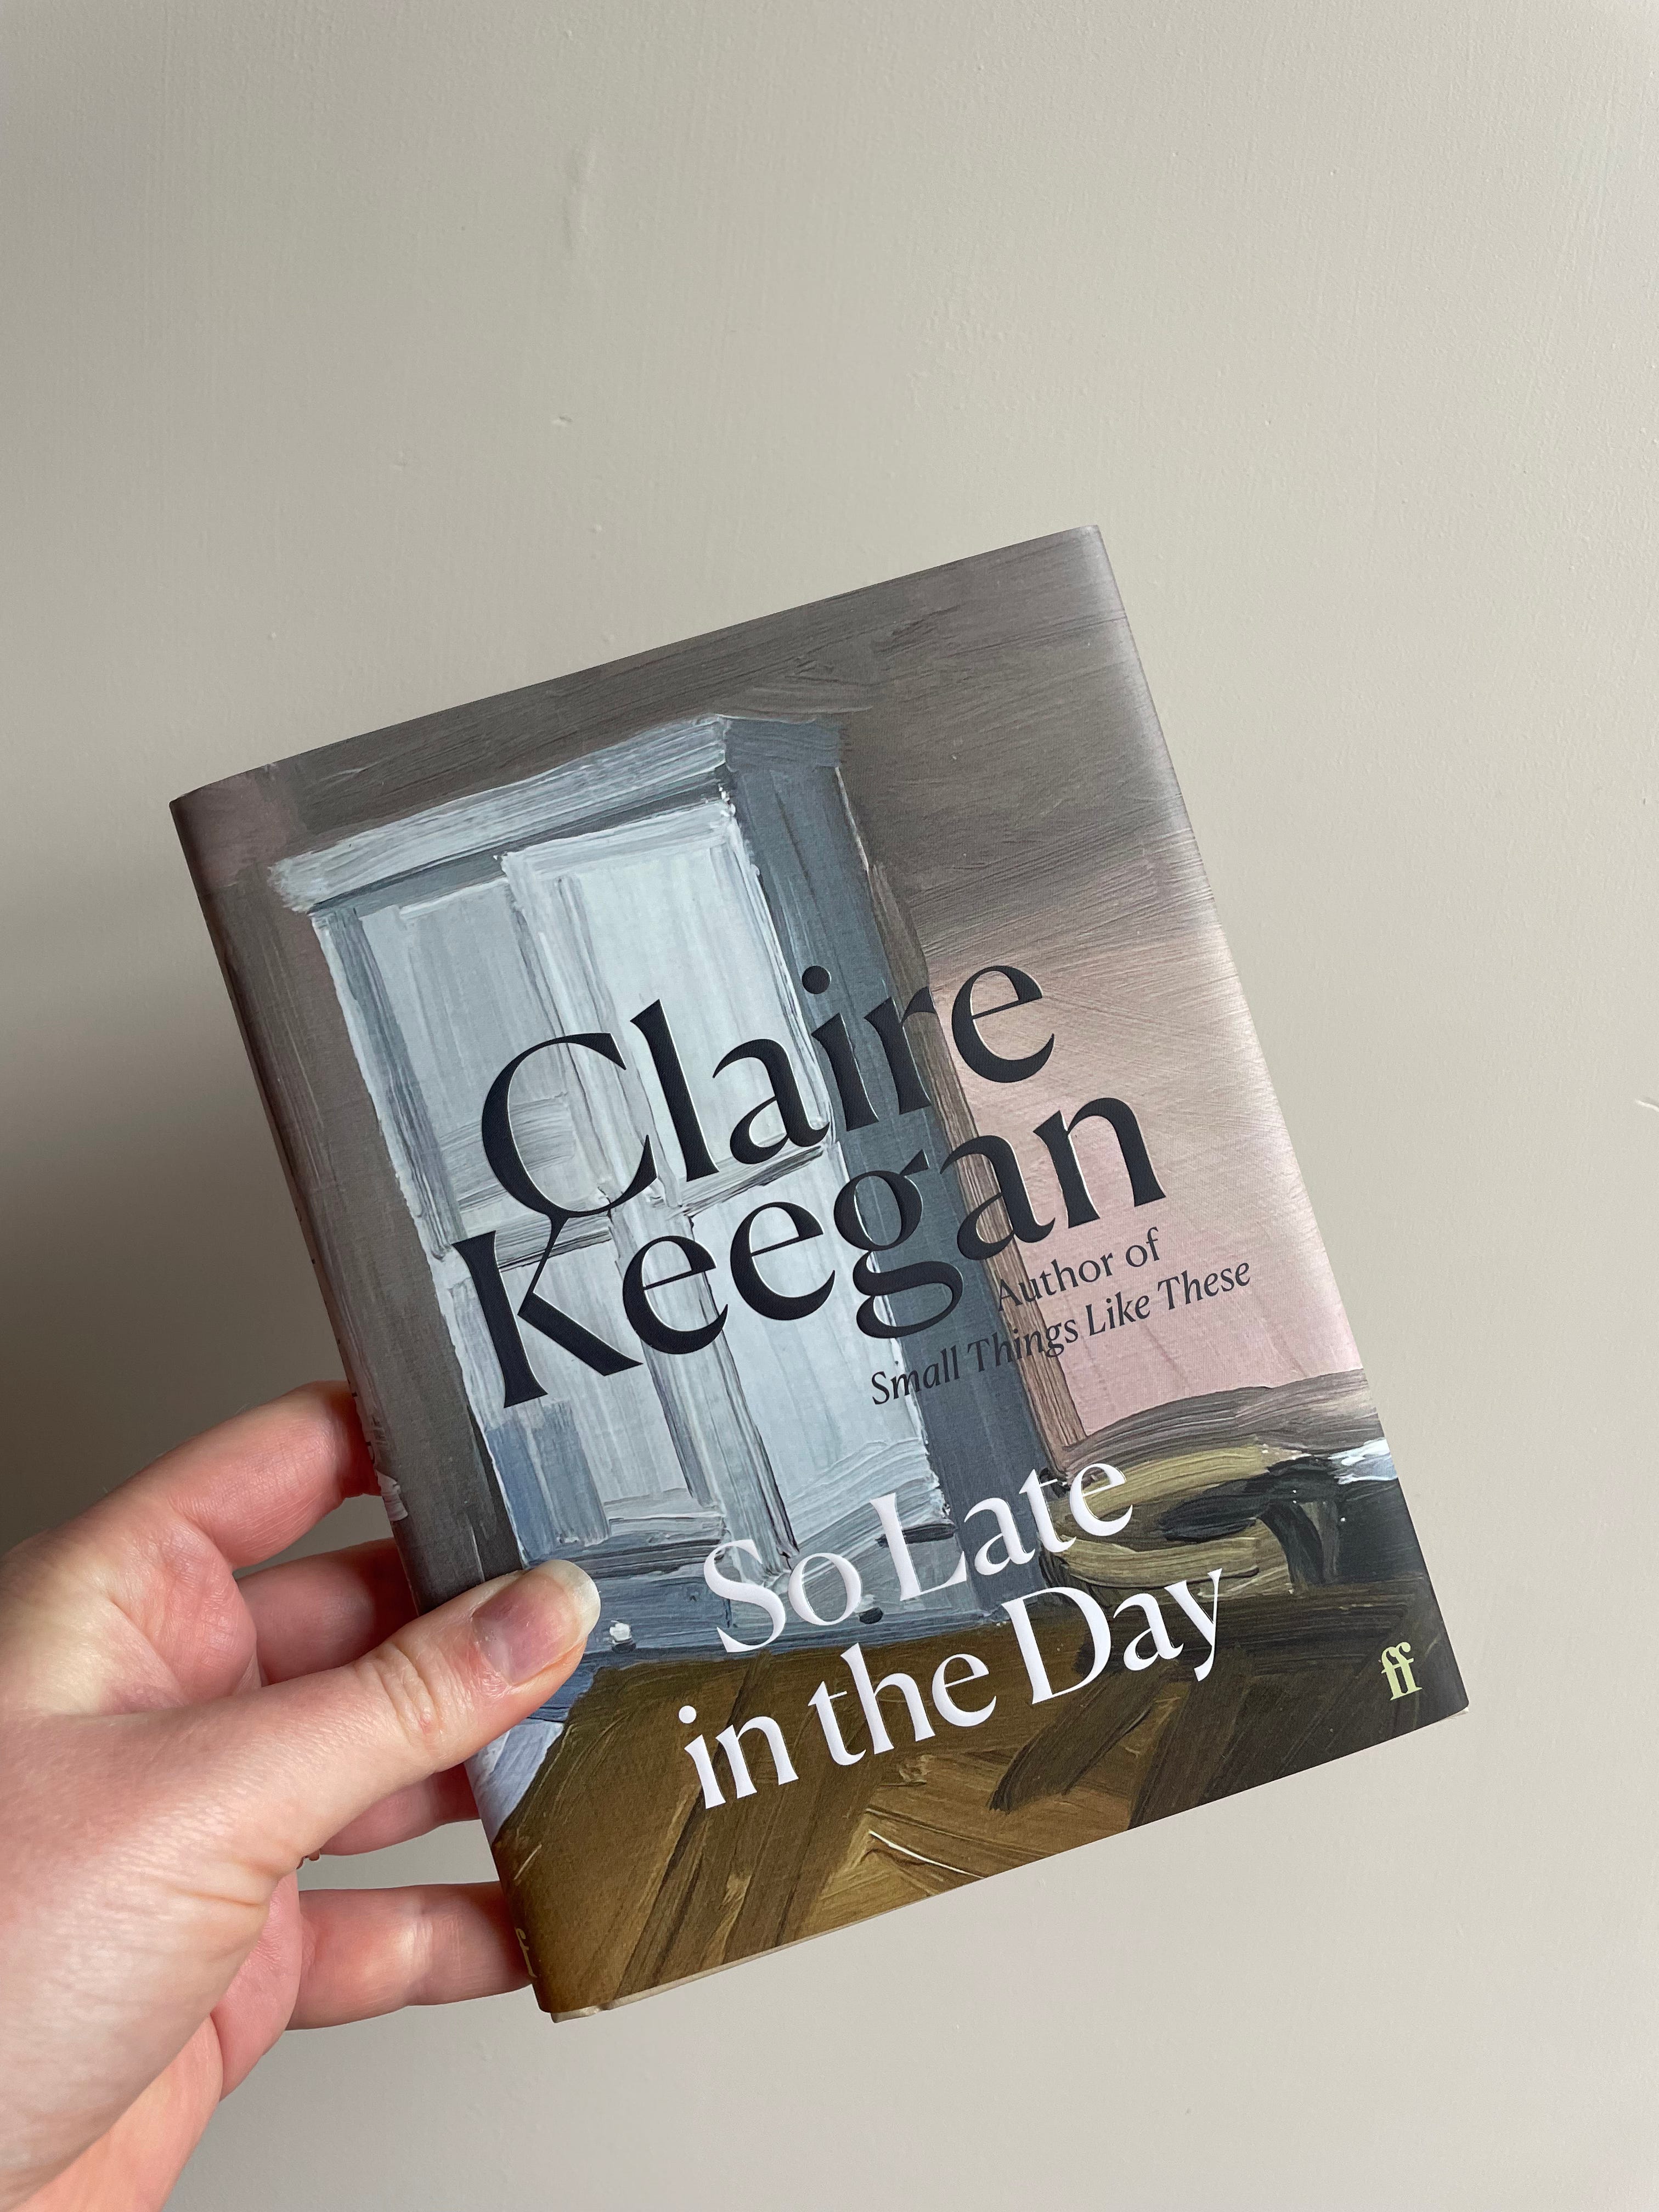 So Late in the Day: Stories of Women and Men by Claire Keegan, Hardcover